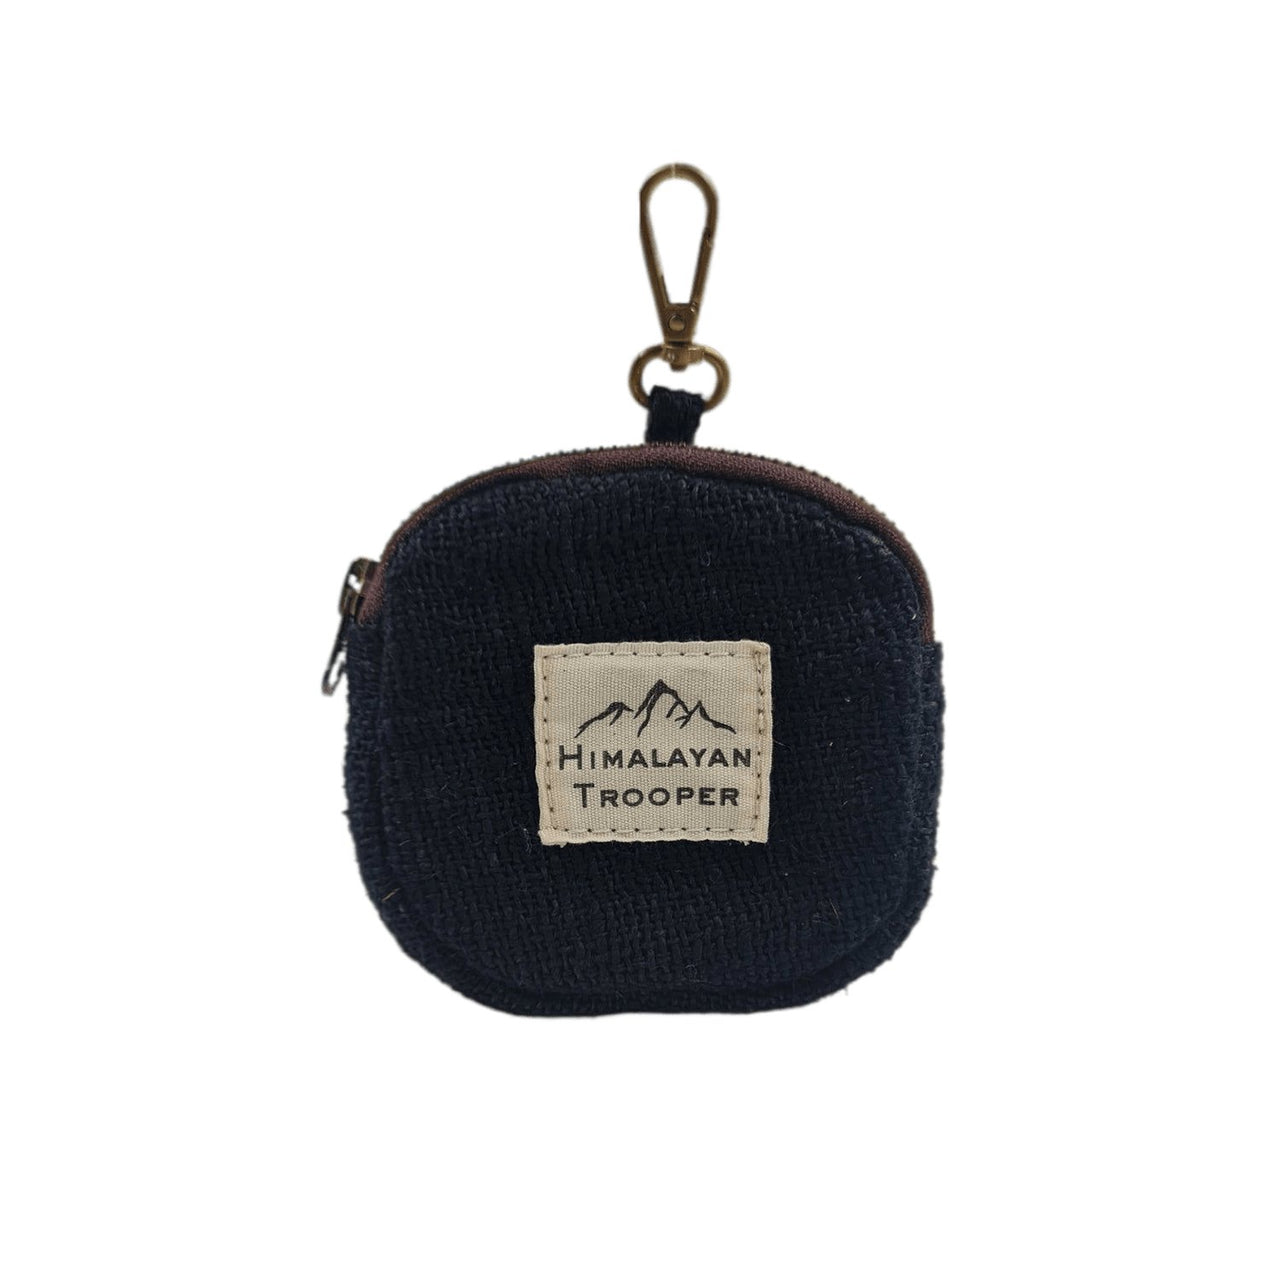 Himalayan Trooper's Pure Hemp Circle Pouch - Pure Hemp Uitility Pouch made from 100% hemp with a soft organic cotton lining. - CBD Store India